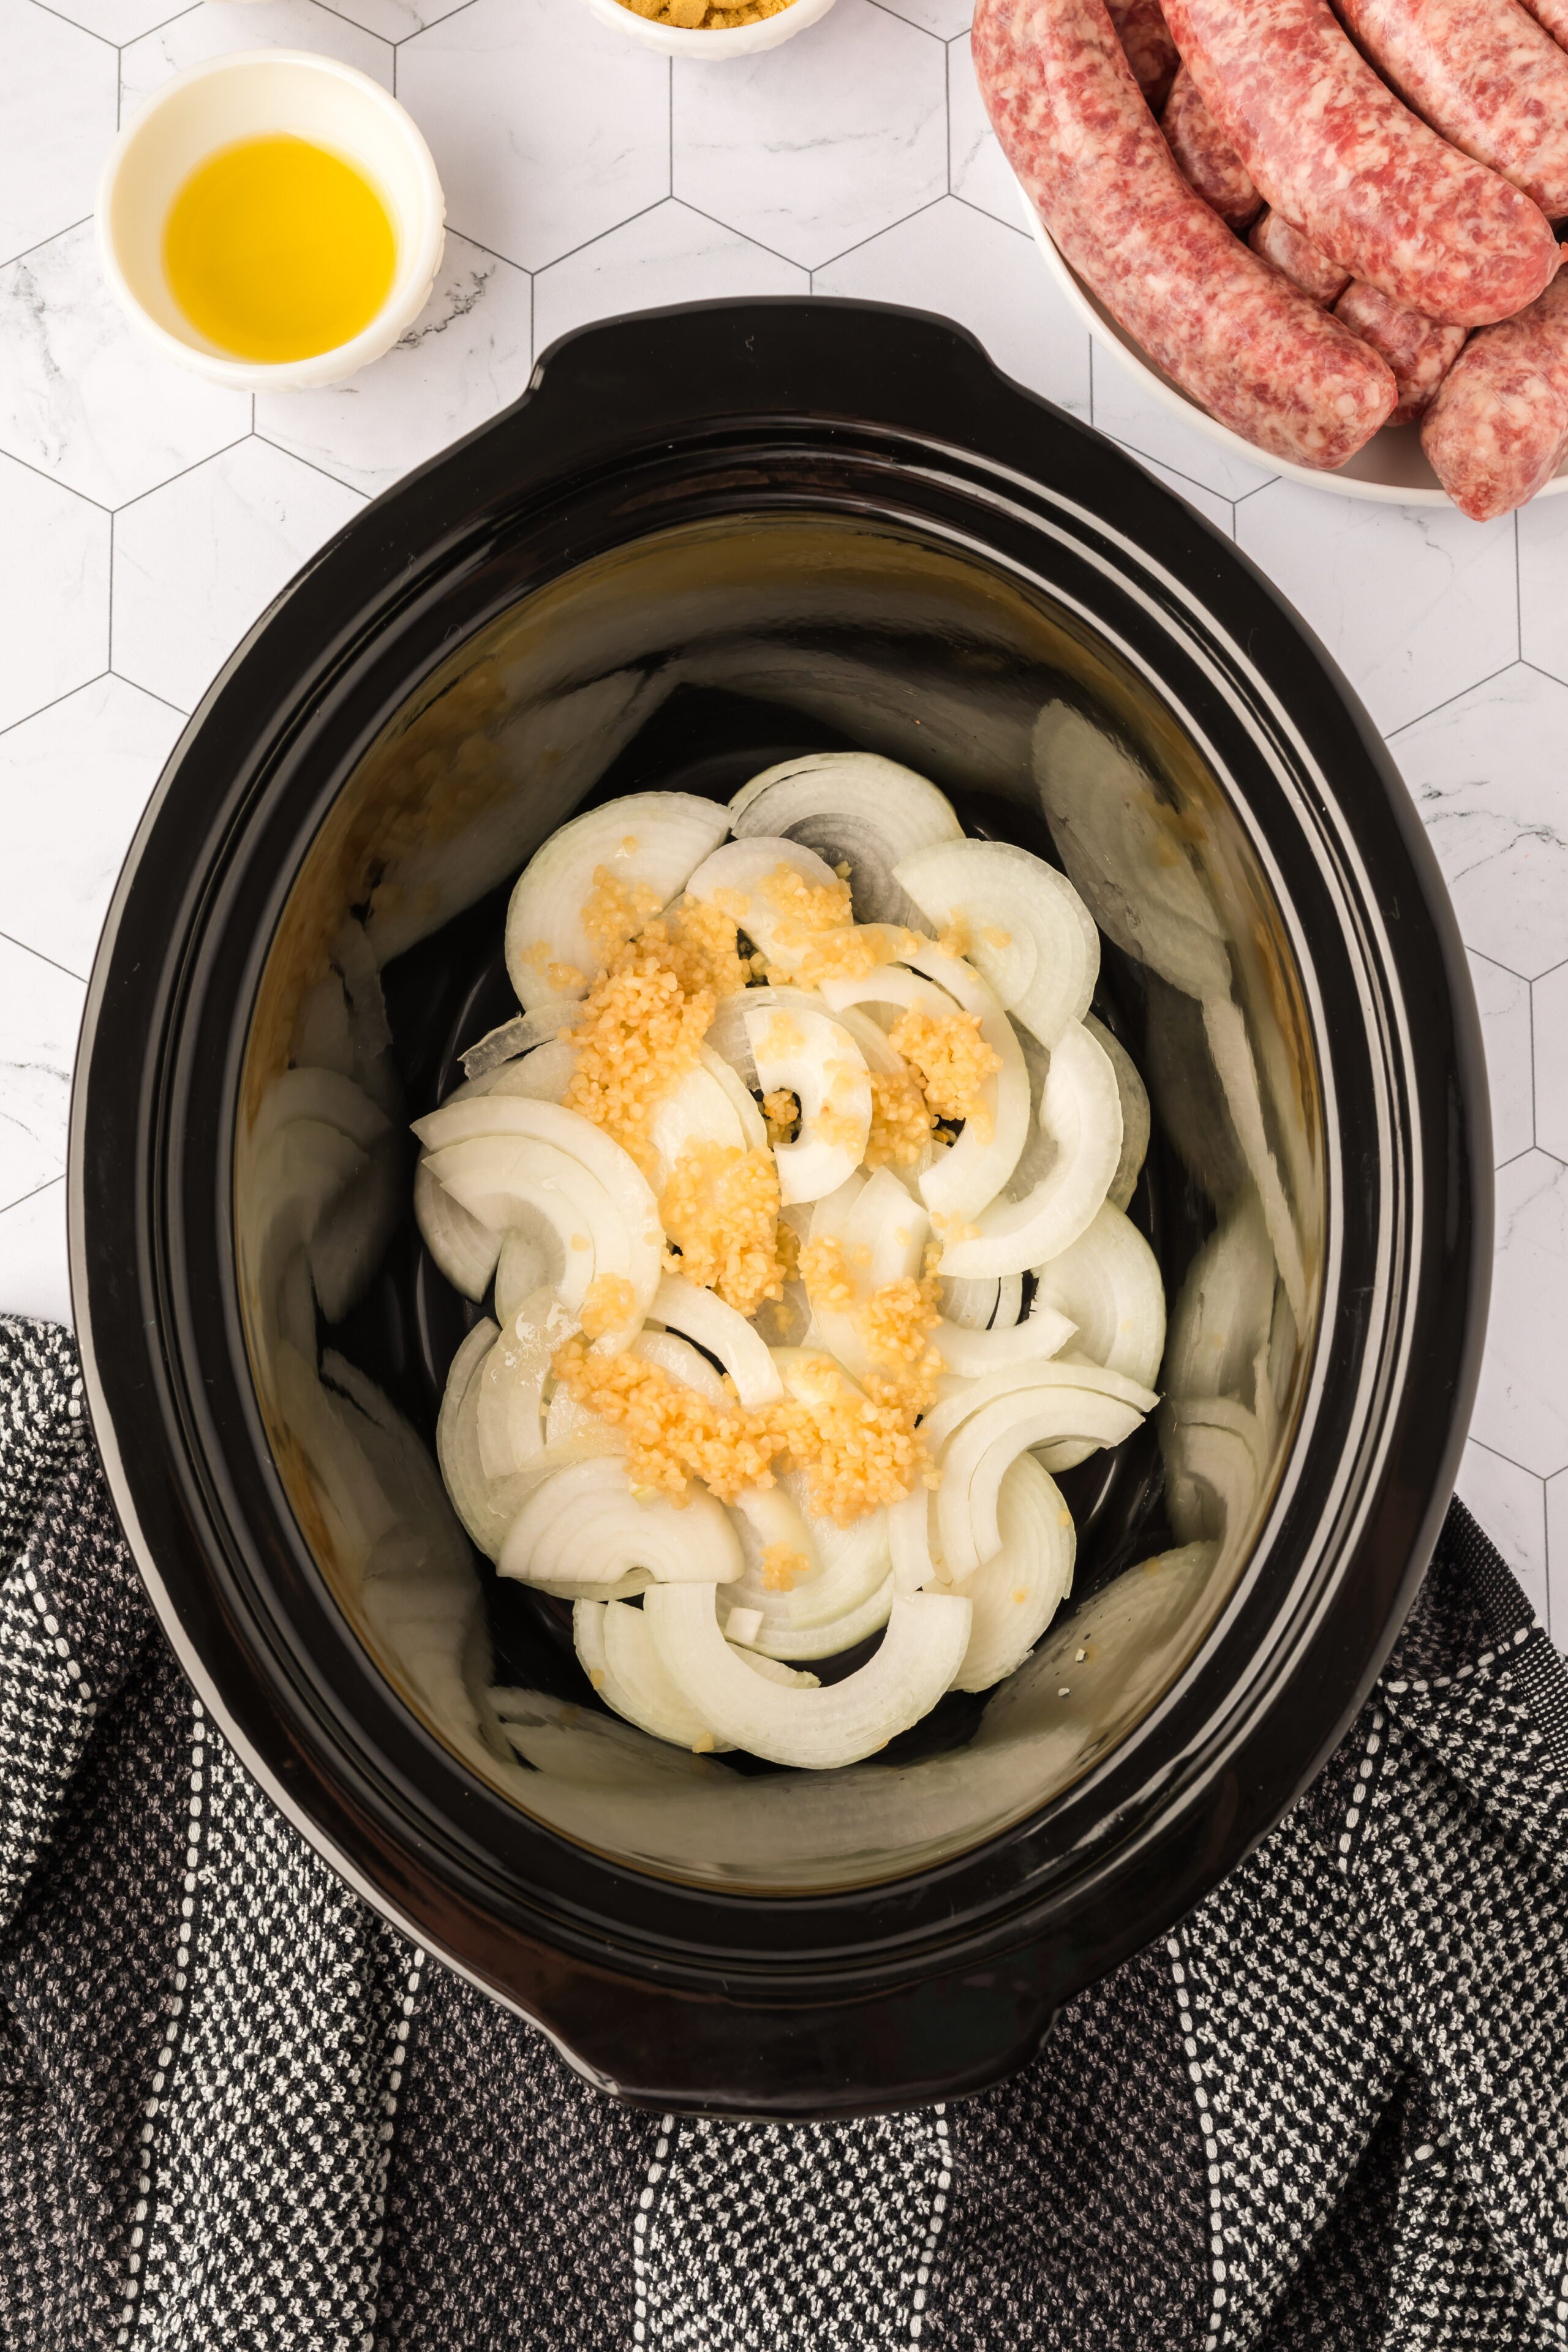 Placing the onions and garlic in the slow cooker